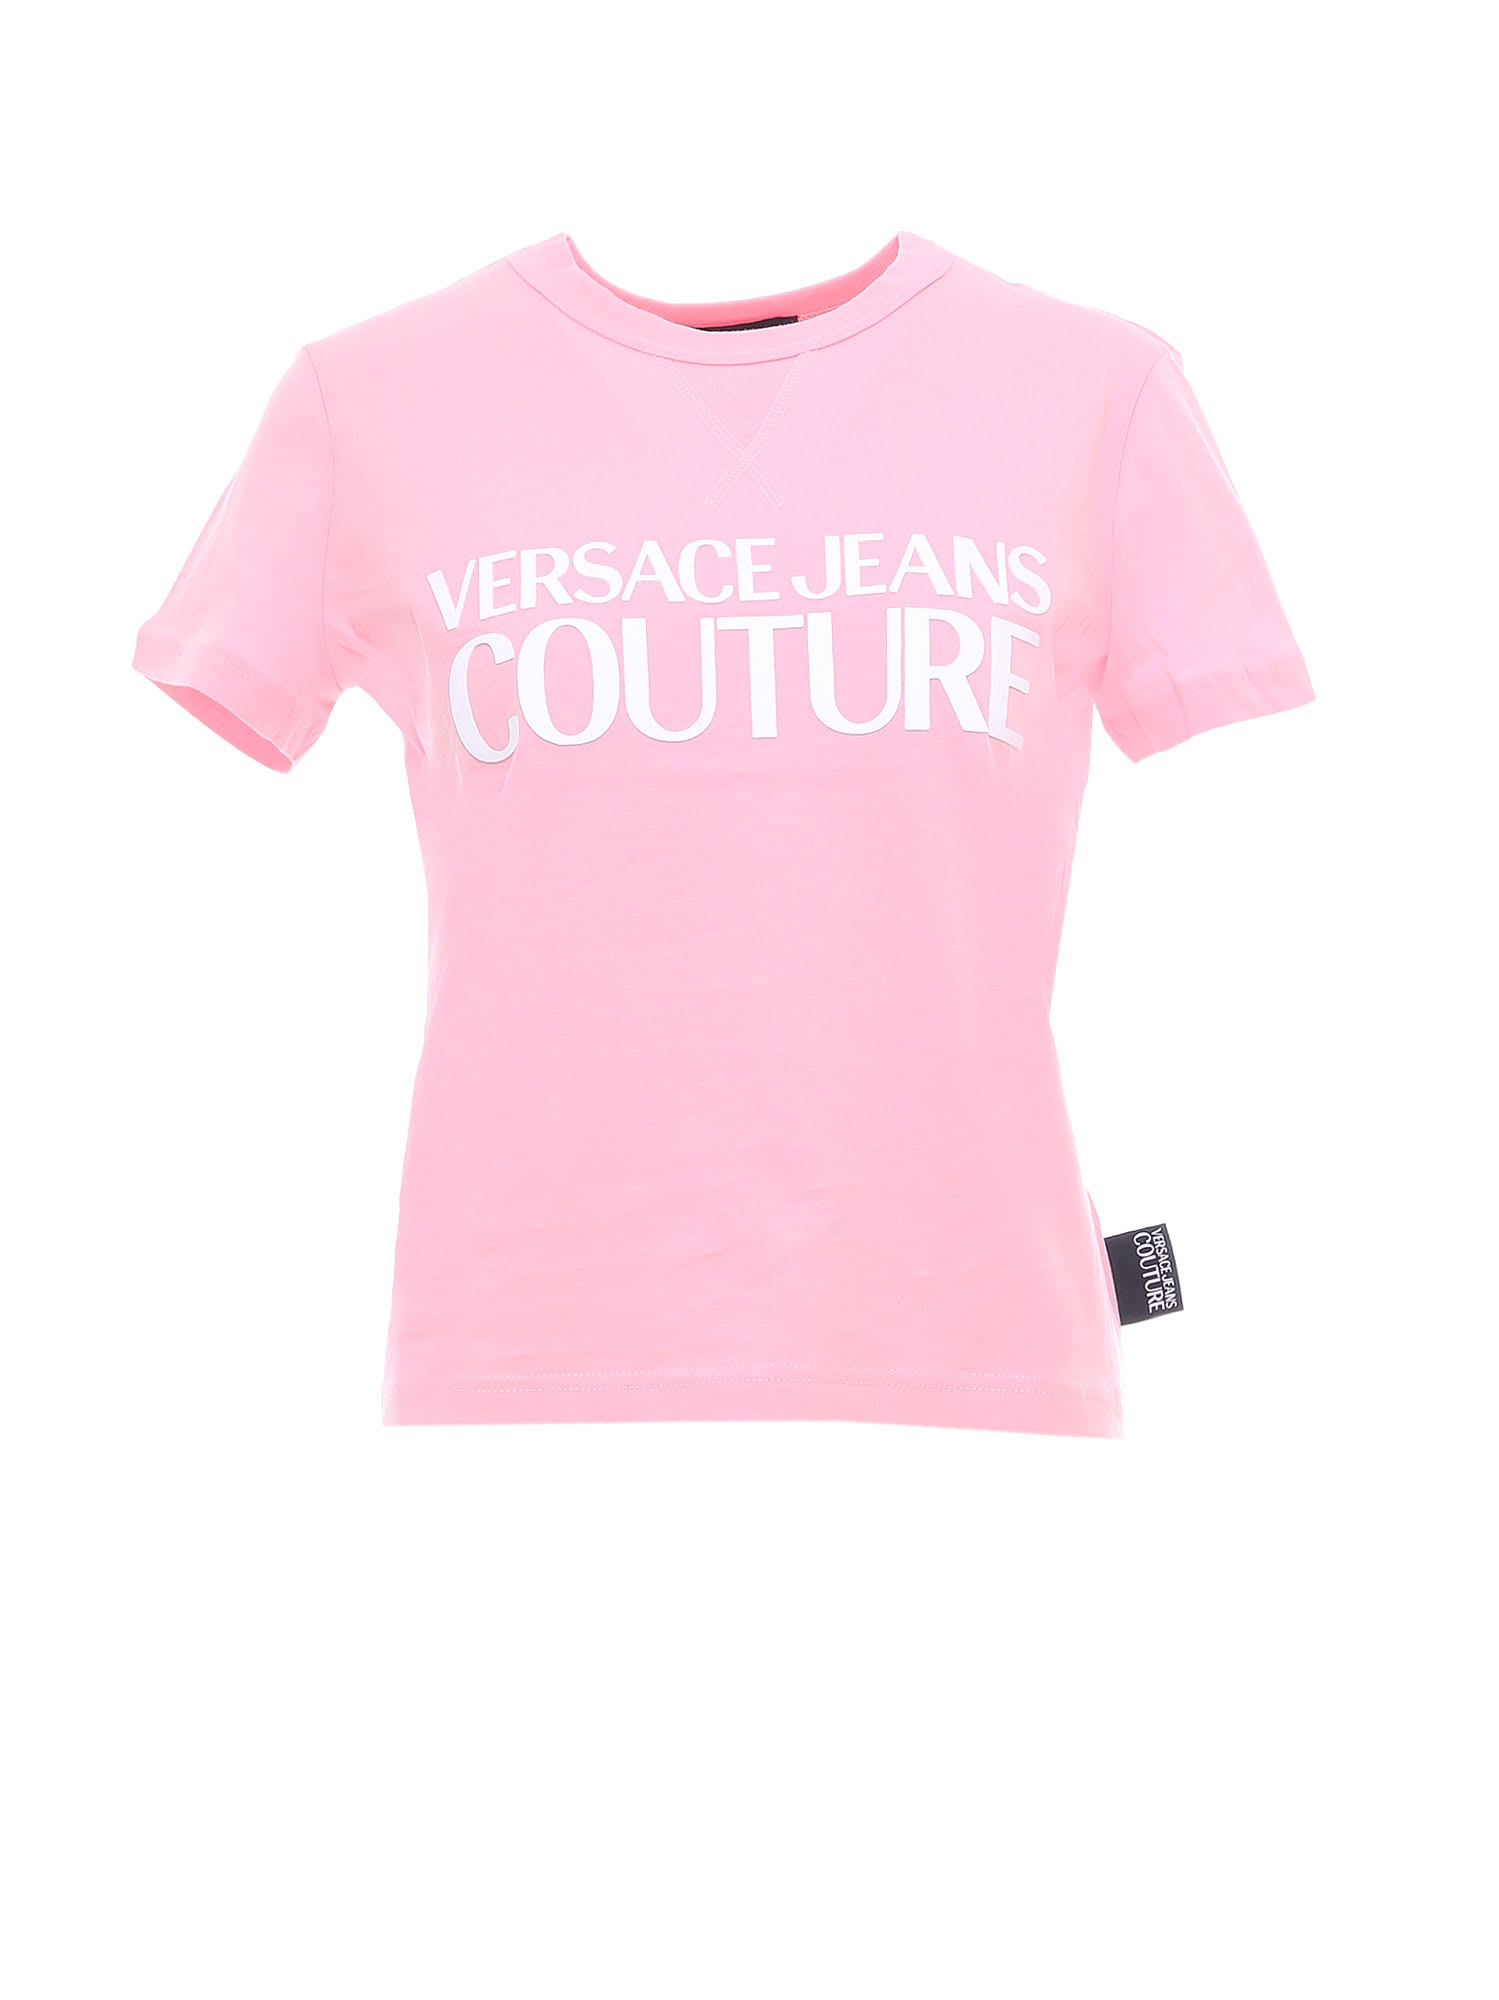 VERSACE JEANS COUTURE T-SHIRT,11306893